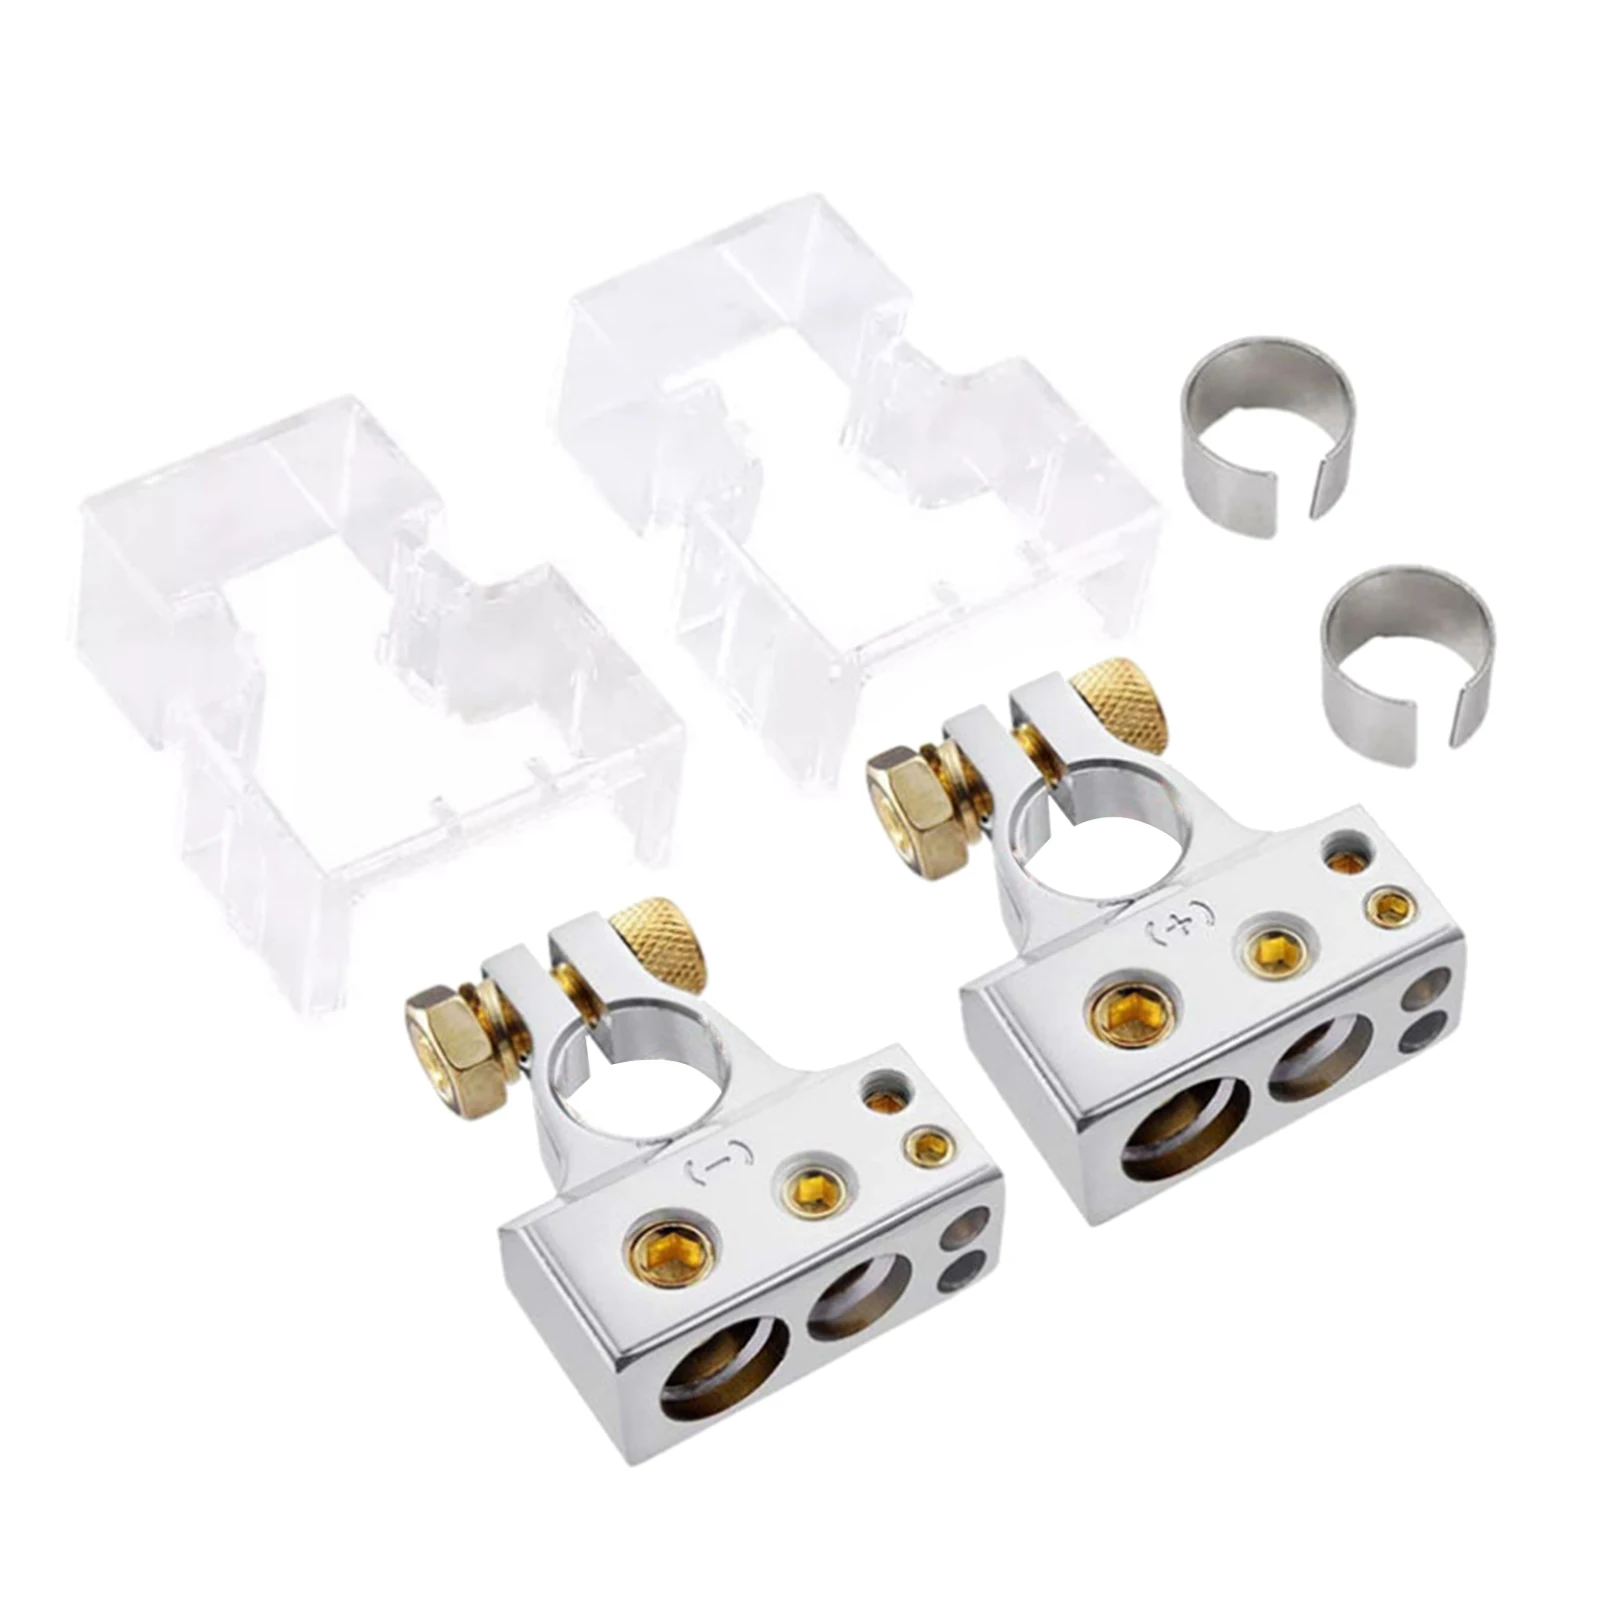 Positive & Negative Battery Terminal Clamp Terminals Connectors Kit with Cover Pair Kit